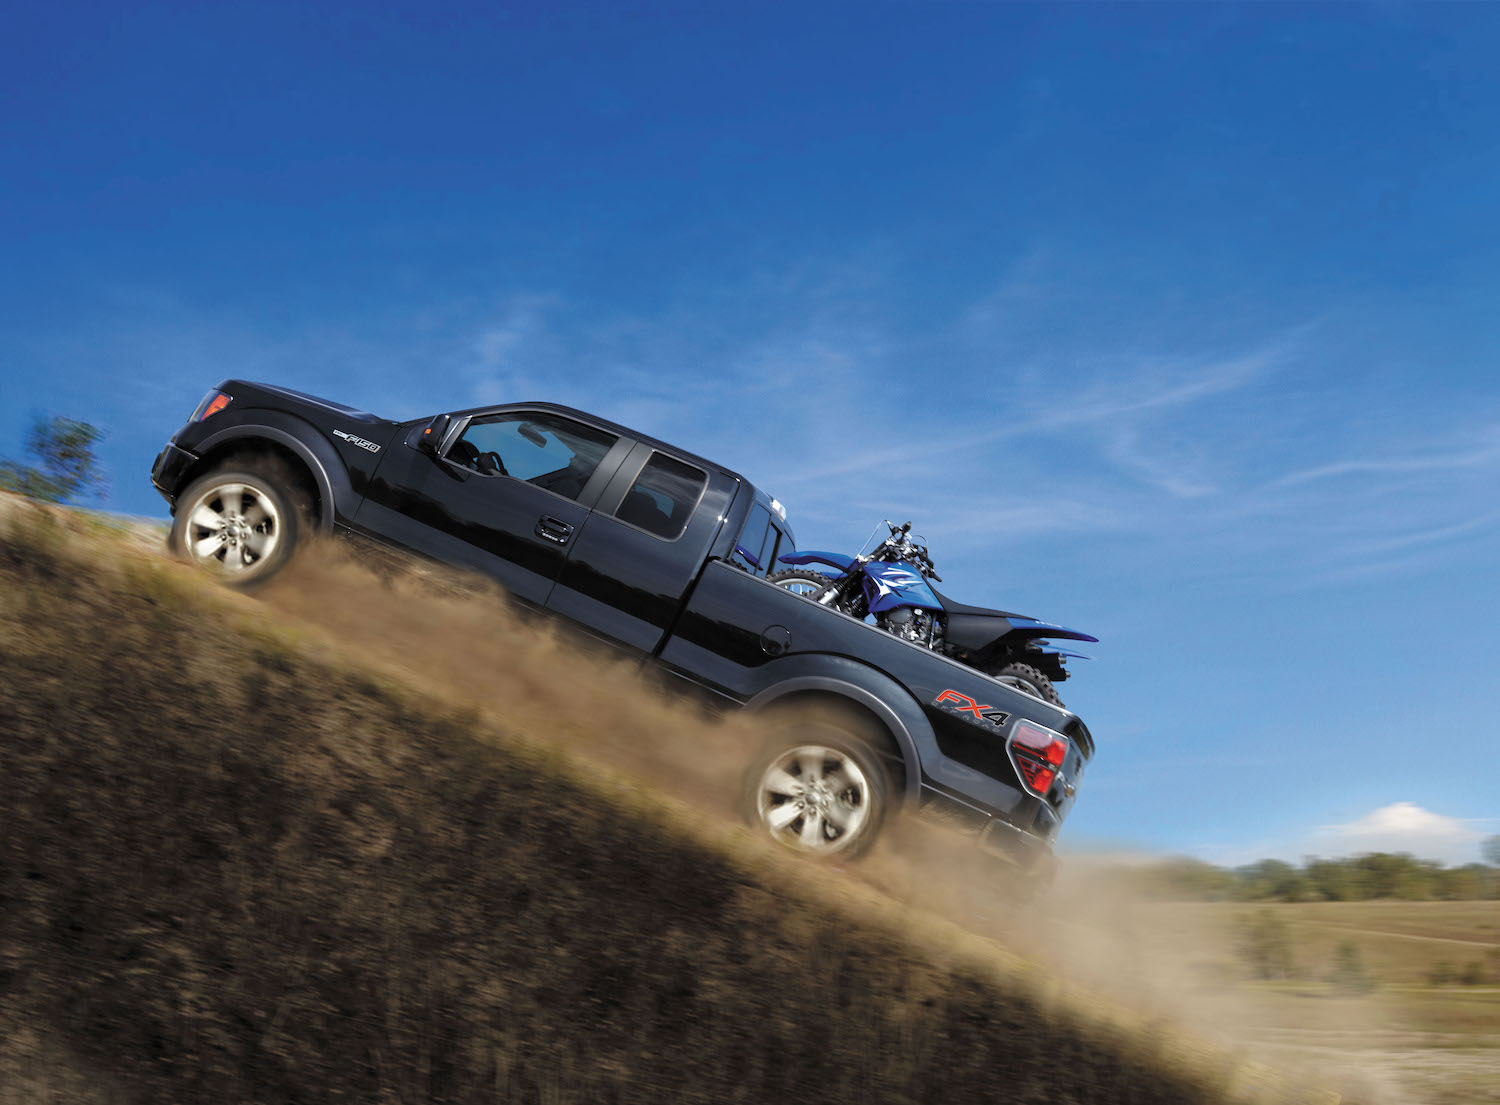 Promo photo of a 2014 Ford F-150 half-ton 4x4 pickup truck climbing a steep hill with a dirt bike in its bed, a blue sky visible in the background.